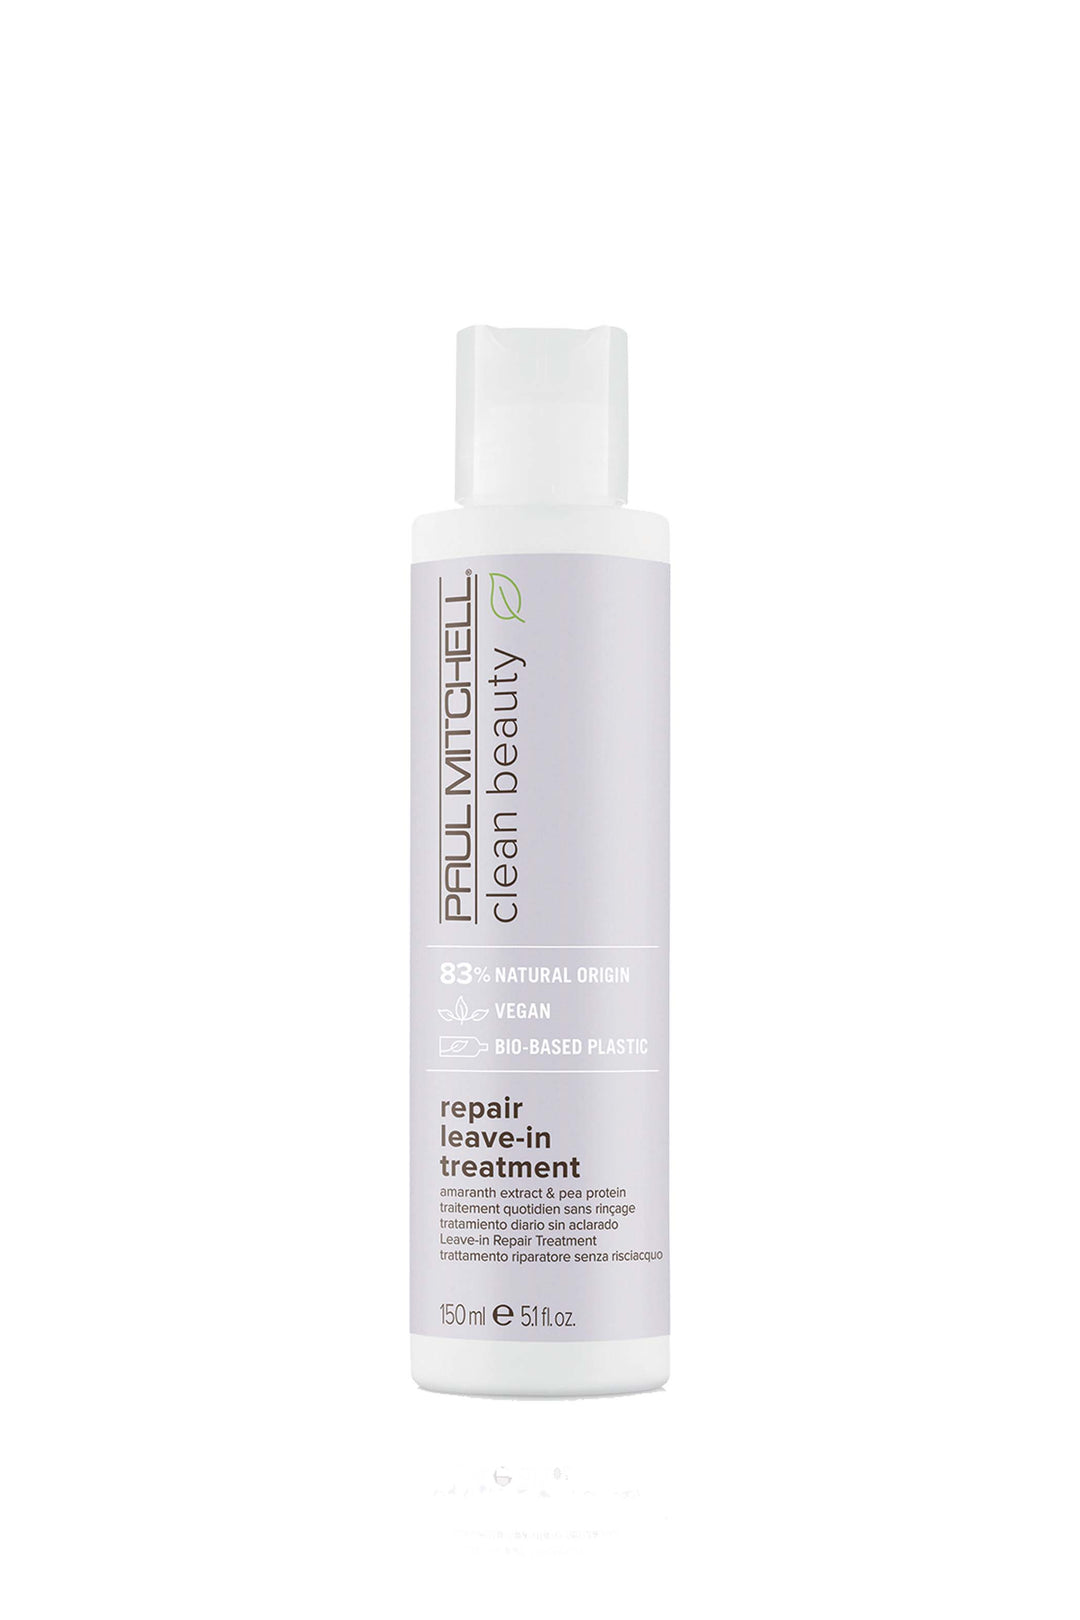 paul-mitchell-clean-beauty-repair-leave-in-treatment-150ml